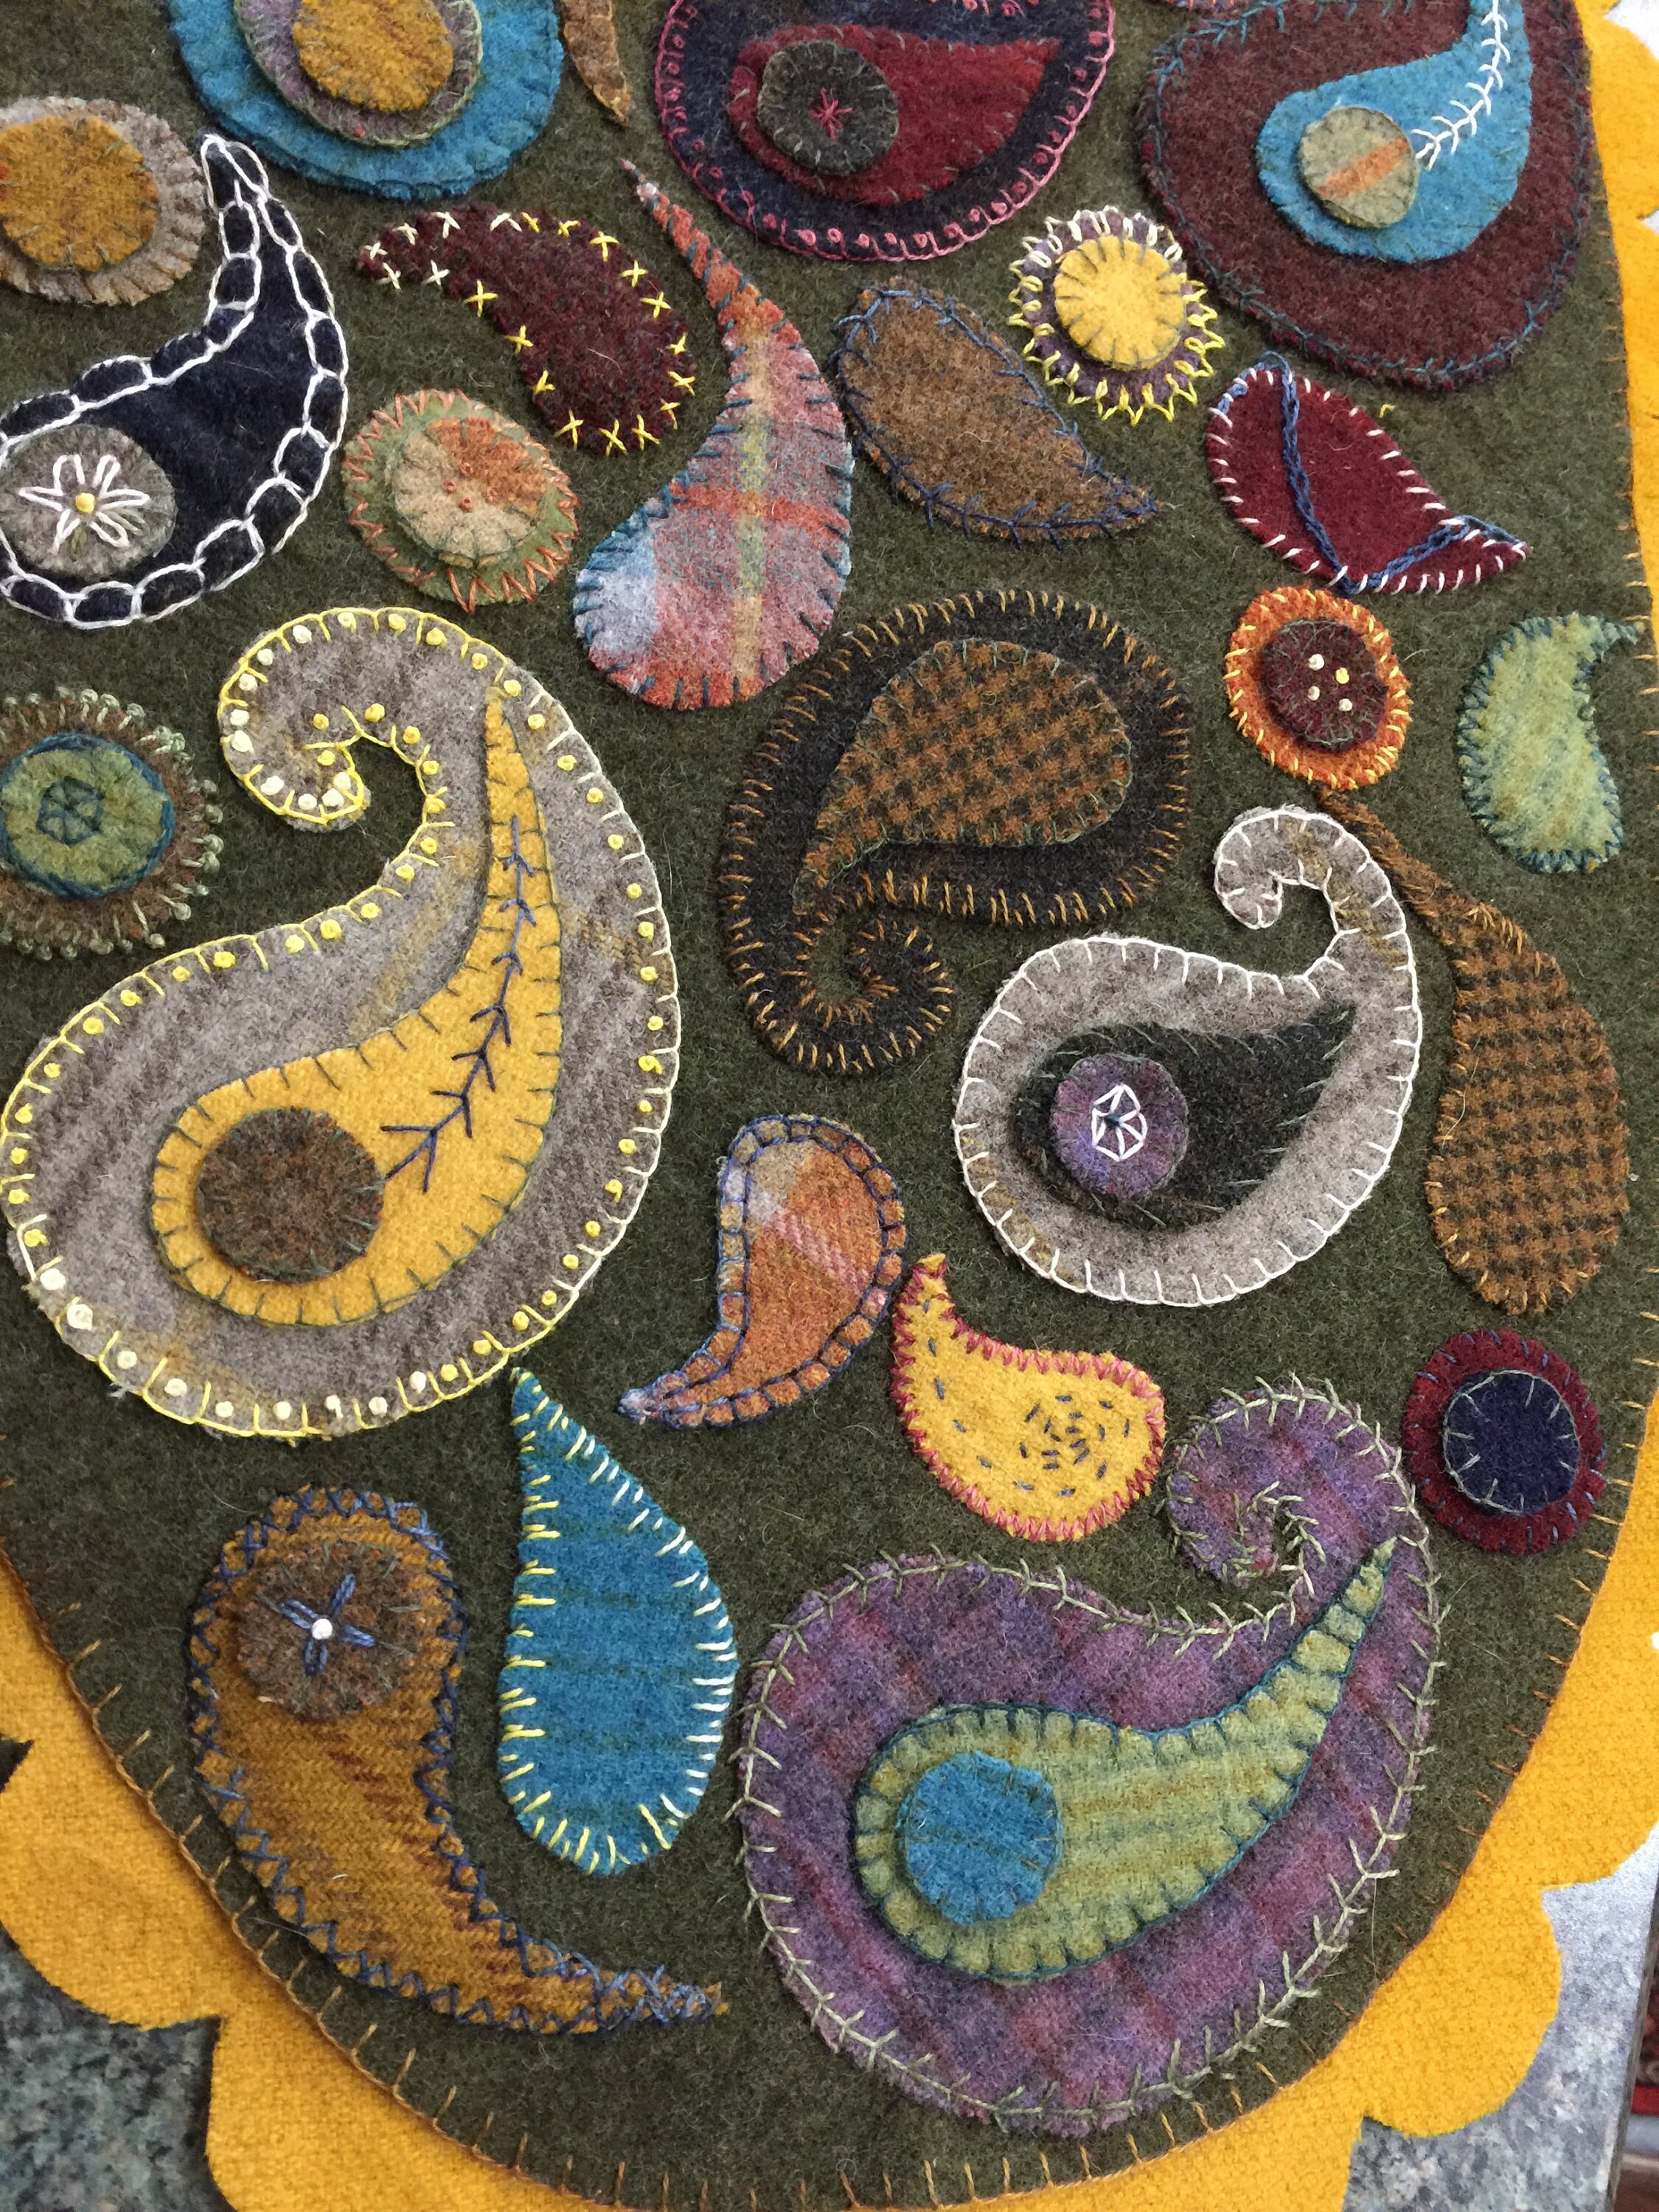 Wool KIT, Large SCALLOPED Pre-cut Wool Appliqué Kit, Wool Penny Rug Kit,  Make Your Own Traditional Penny Rug, Recycled Wool Appliqué Kit 